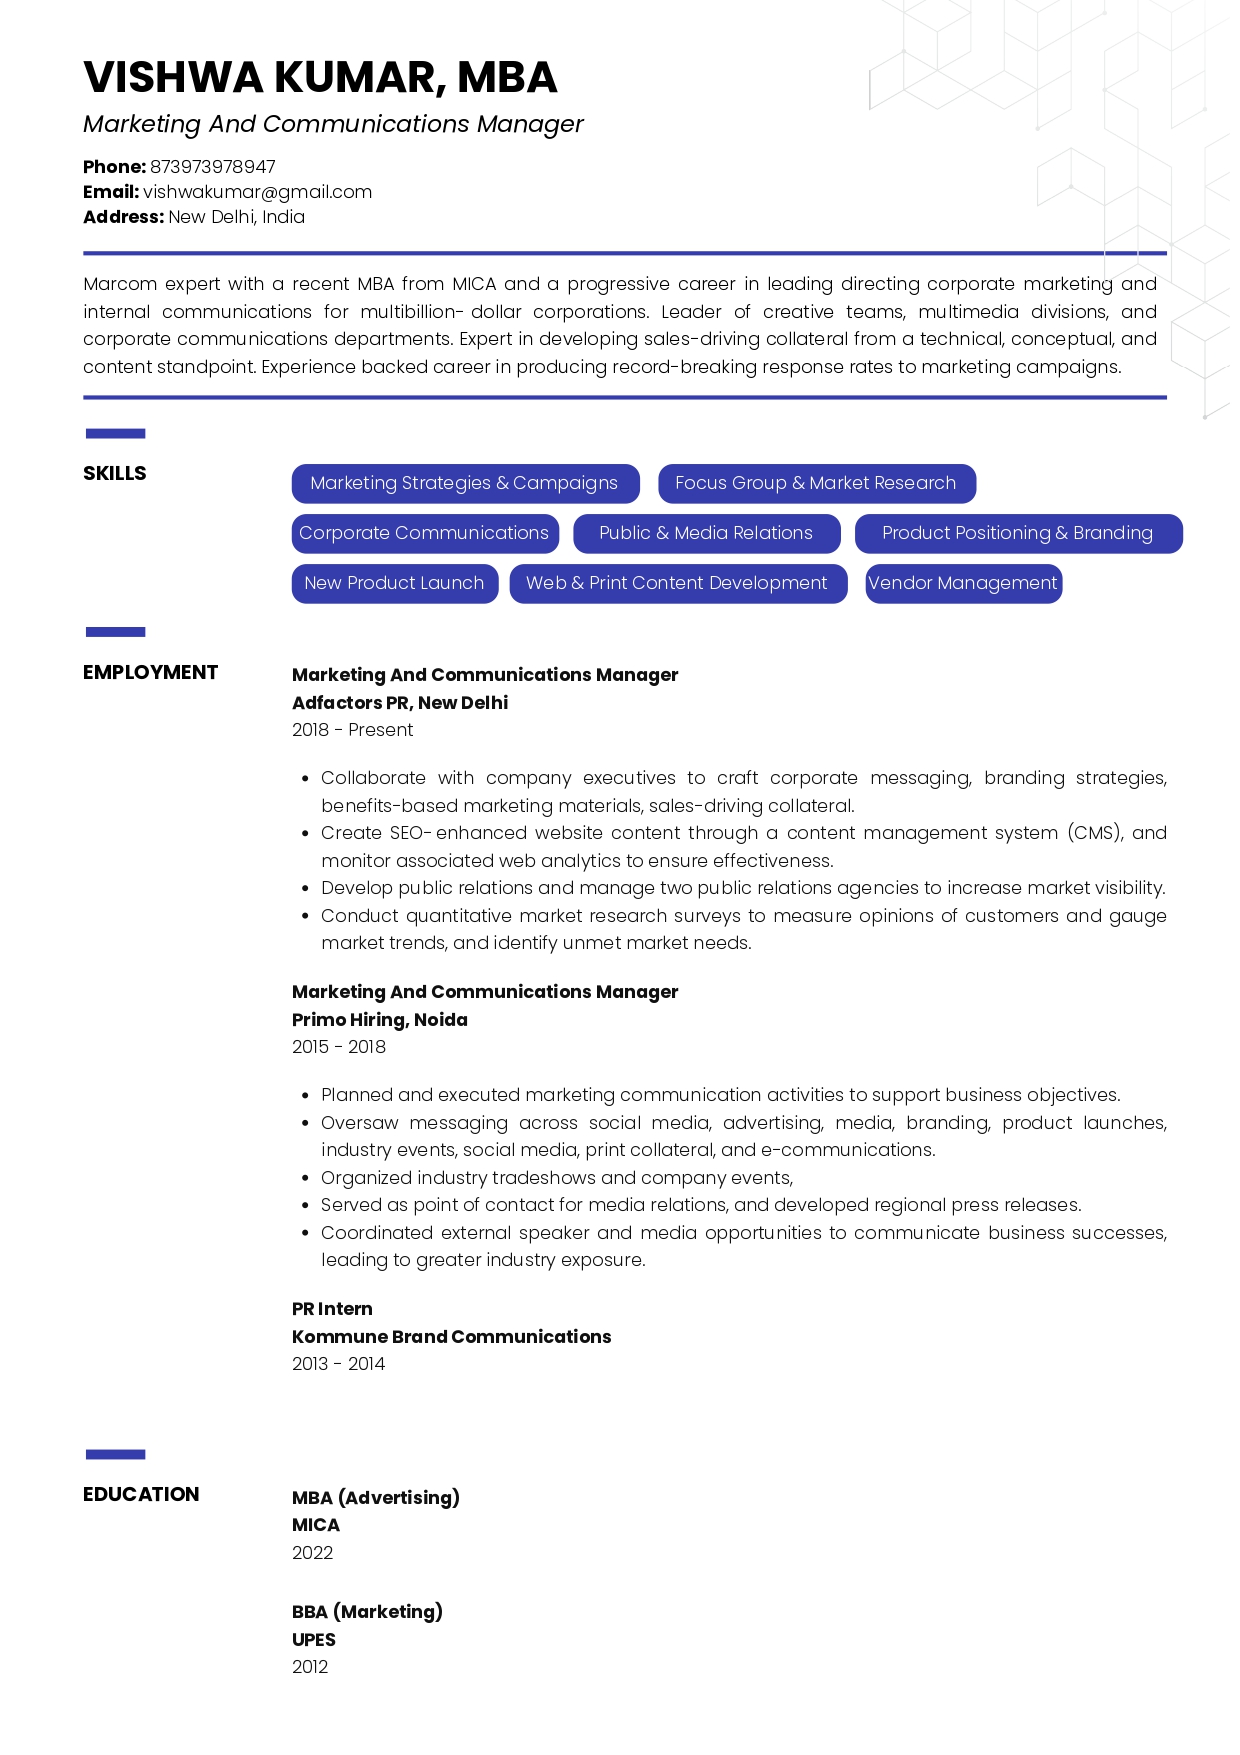 Sample Resume of Marketing and Communications Manager | Free Resume Templates & Samples on Resumod.co